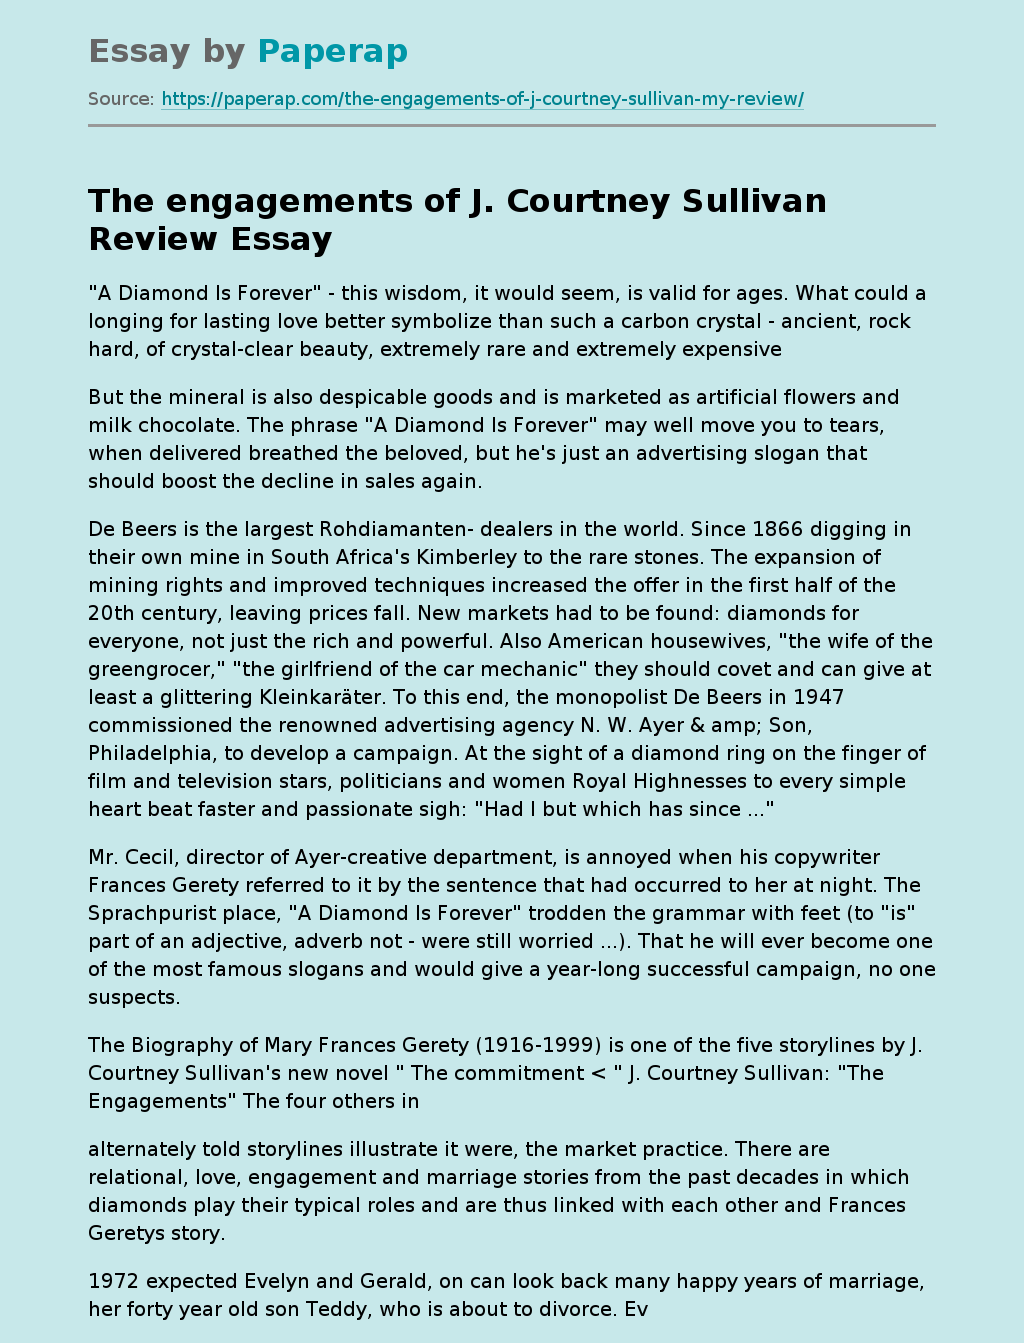 The engagements of J. Courtney Sullivan Review